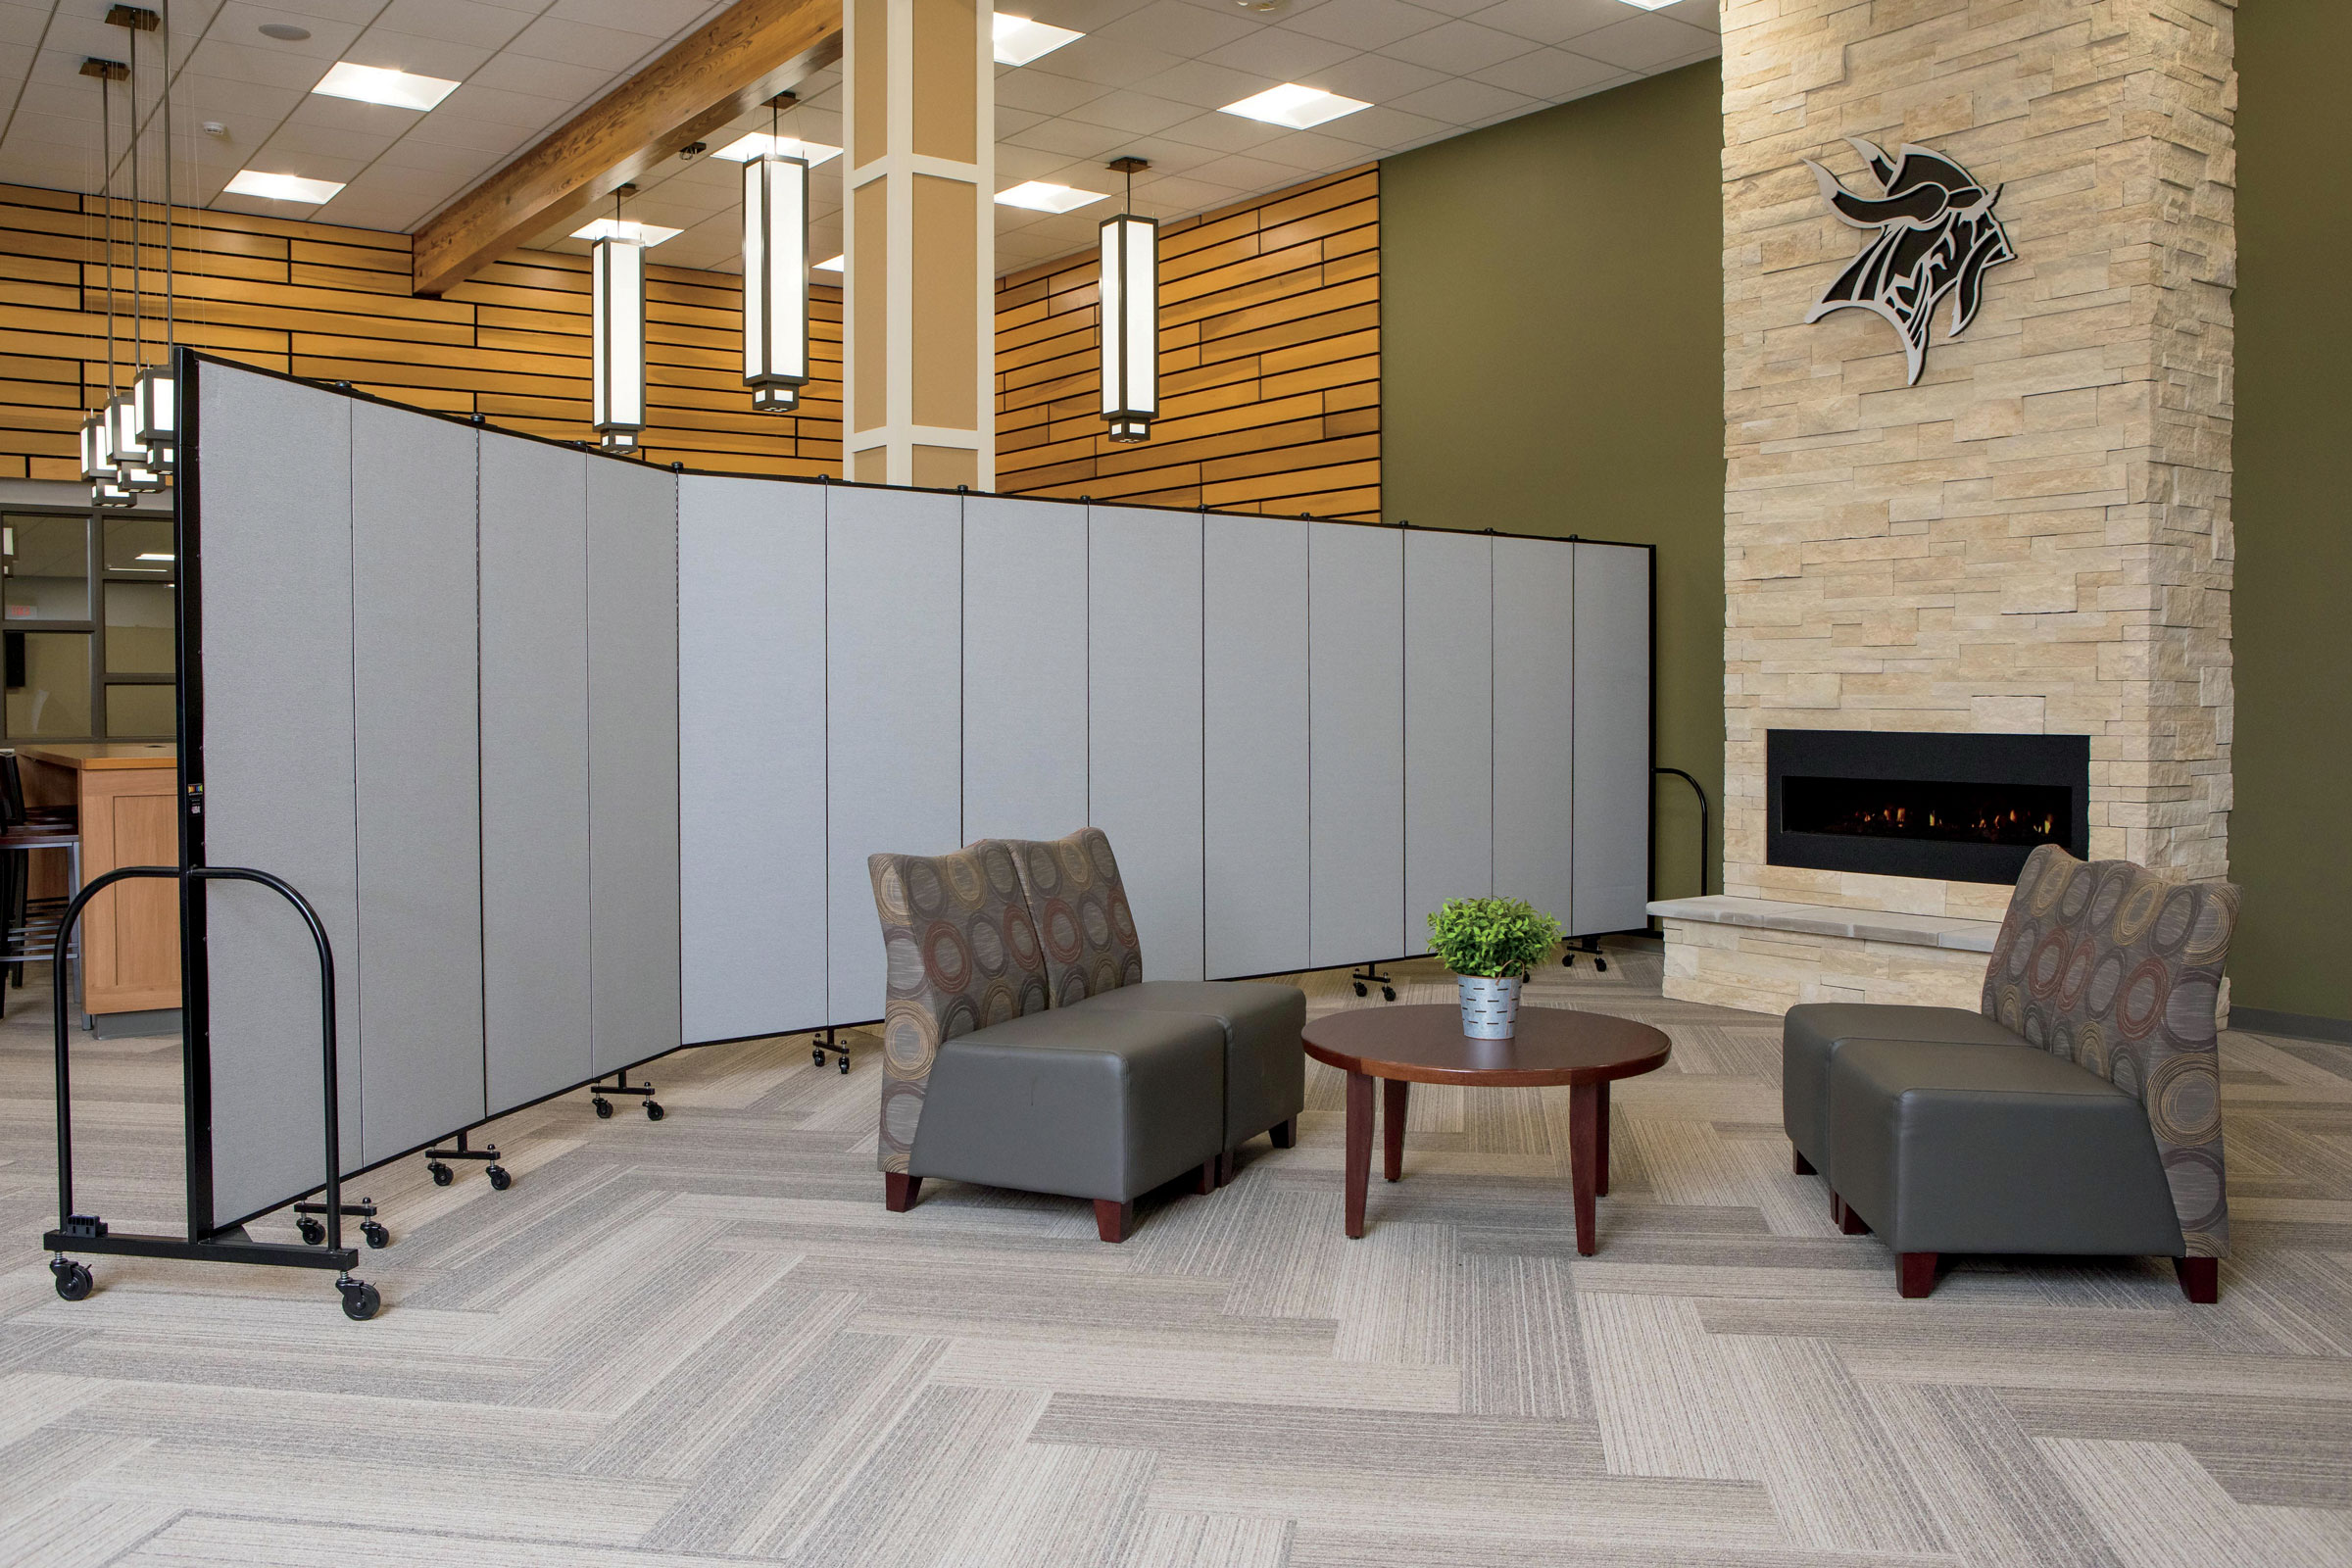 How Do Portable Room Dividers Improve Offices?